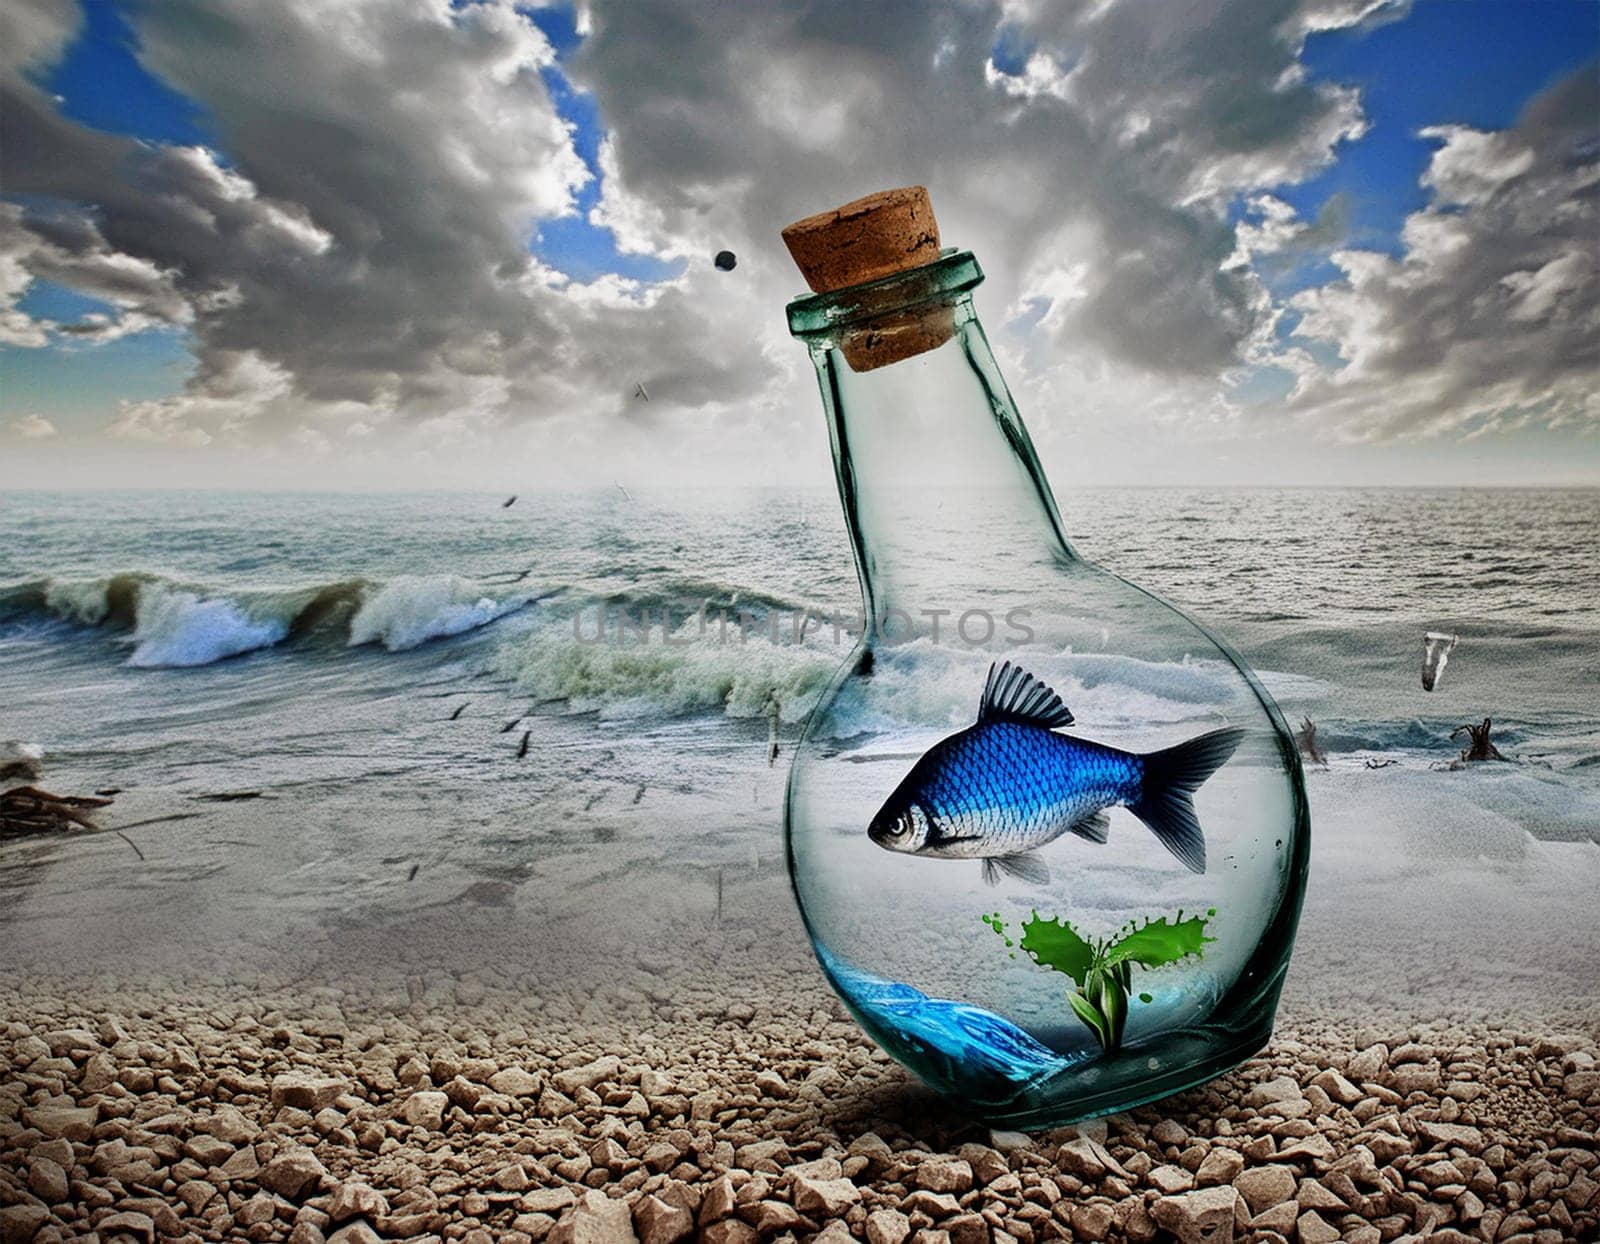 Environmental pollution sea of water, fish in bottle message in a bottle,